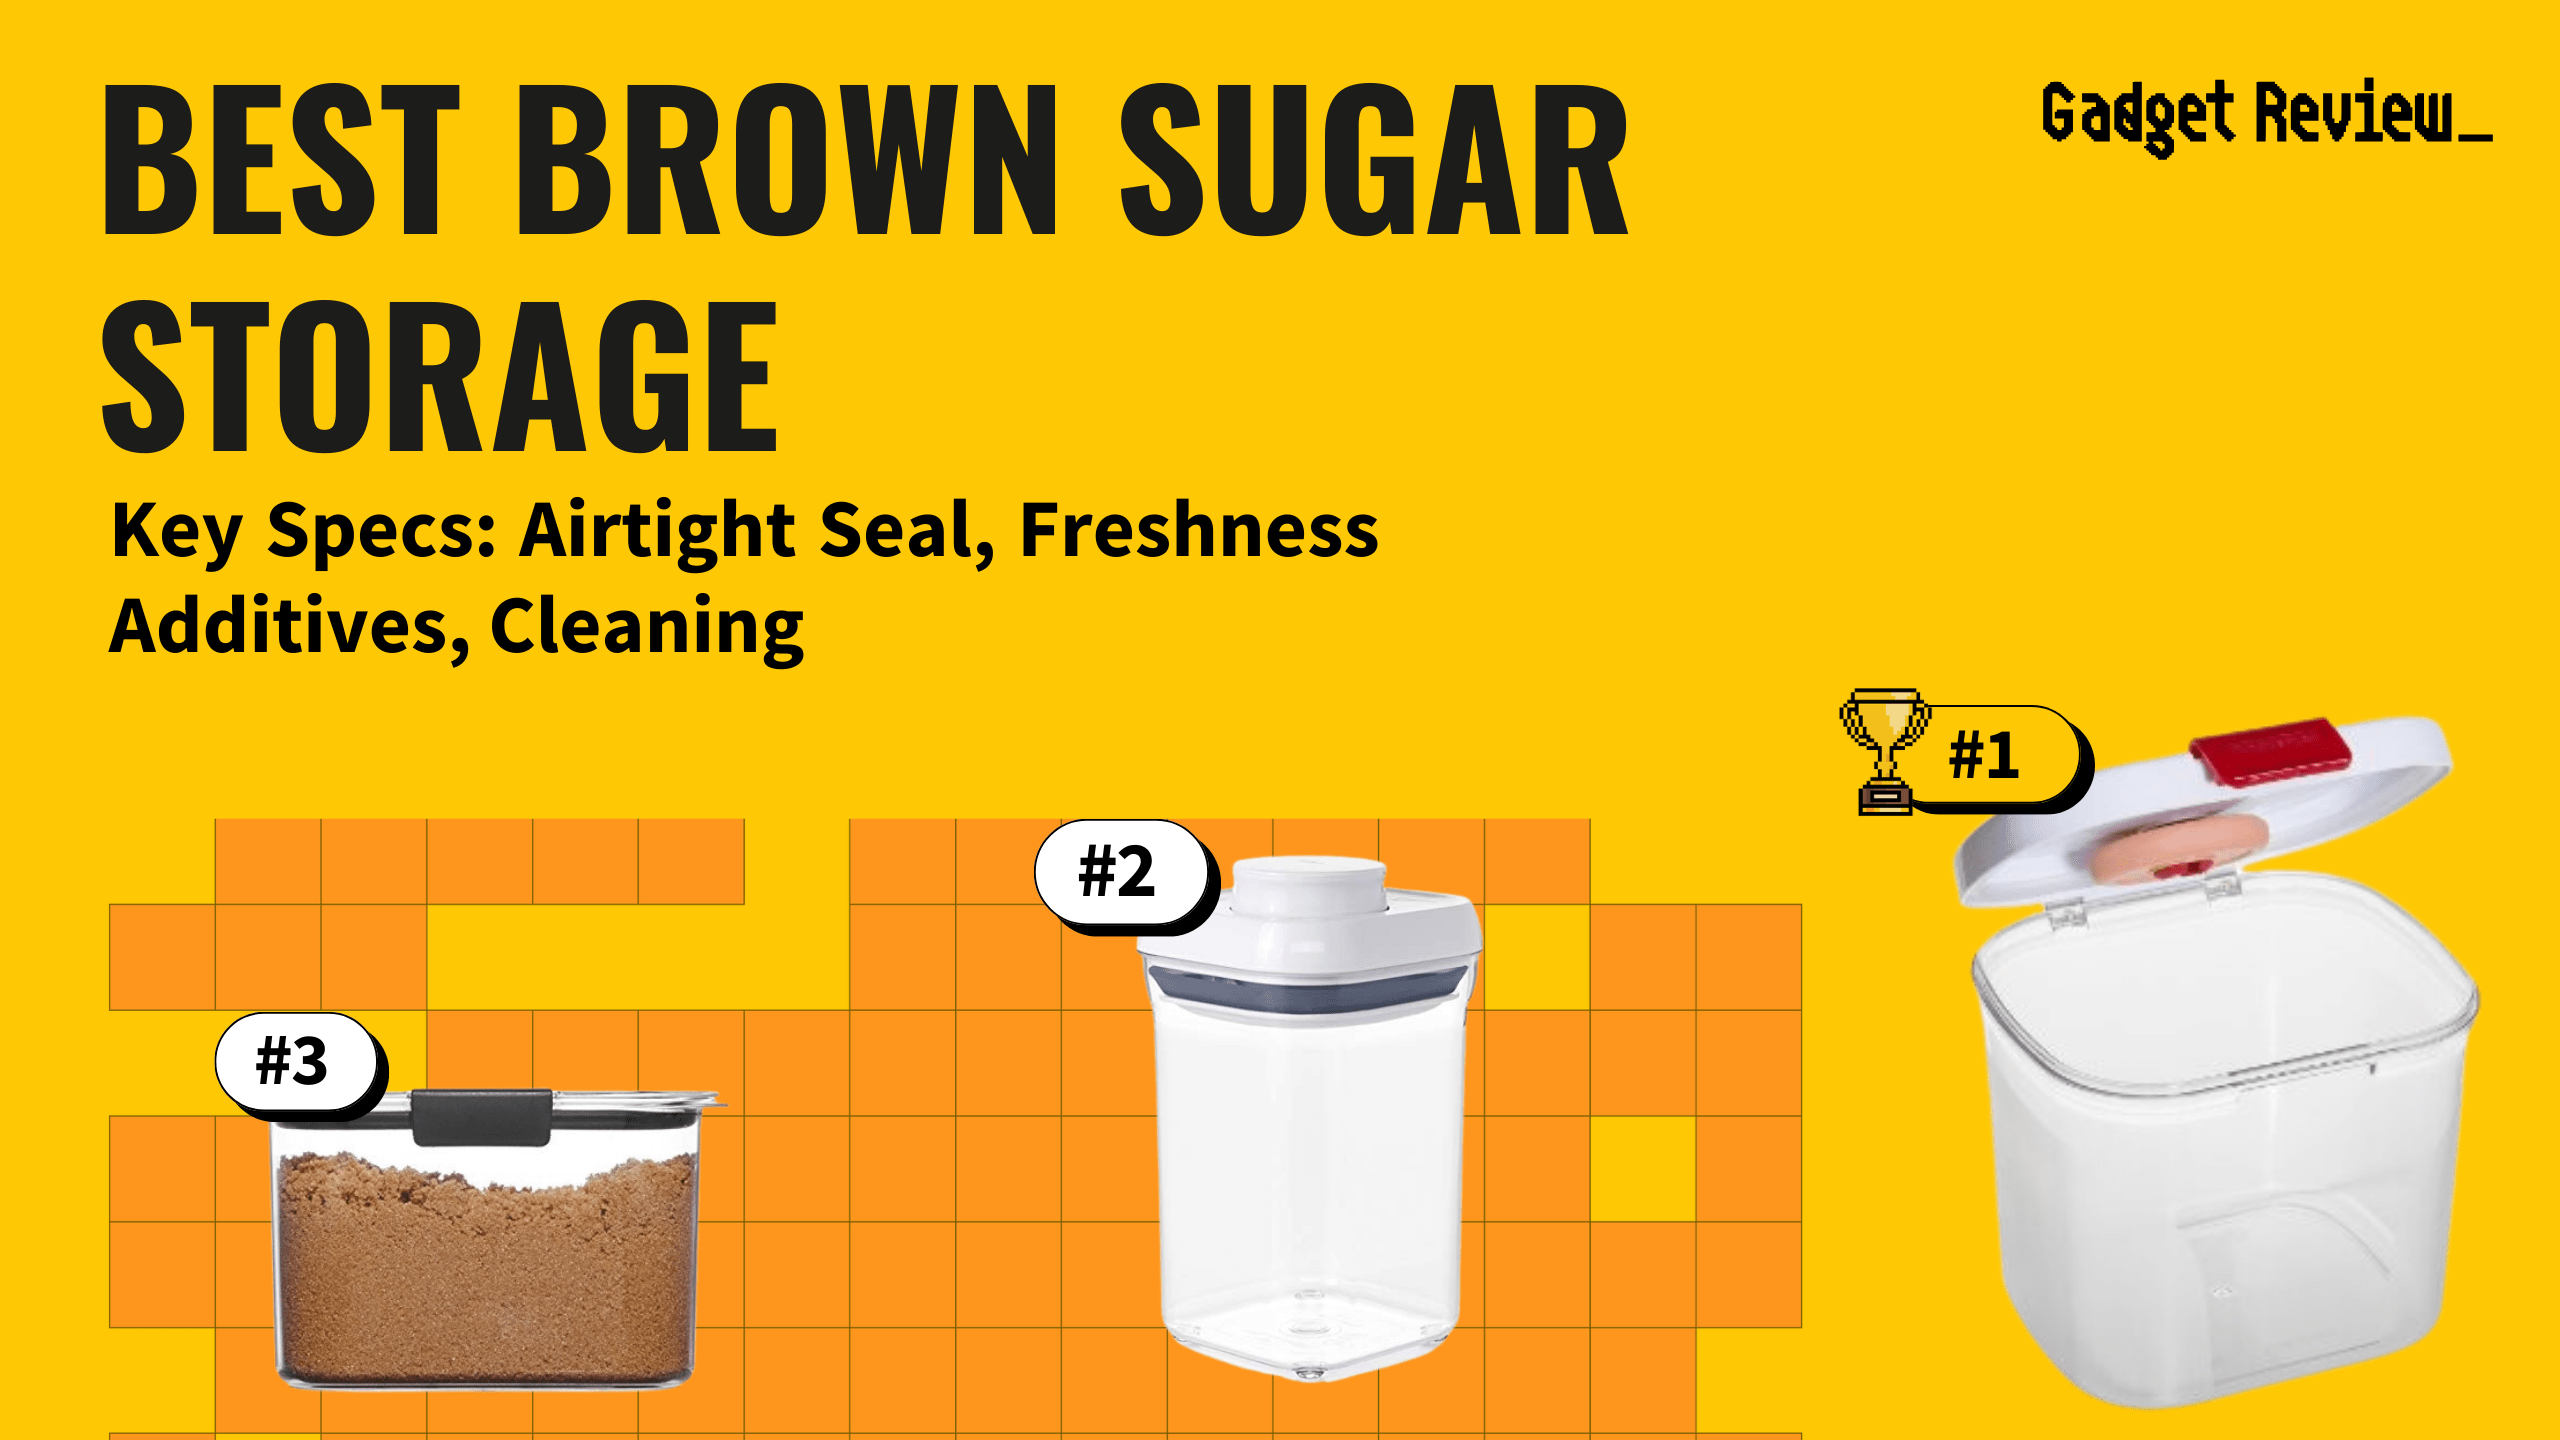 Best Container to Keep Brown Sugar Soft: Progressive Sugar Container